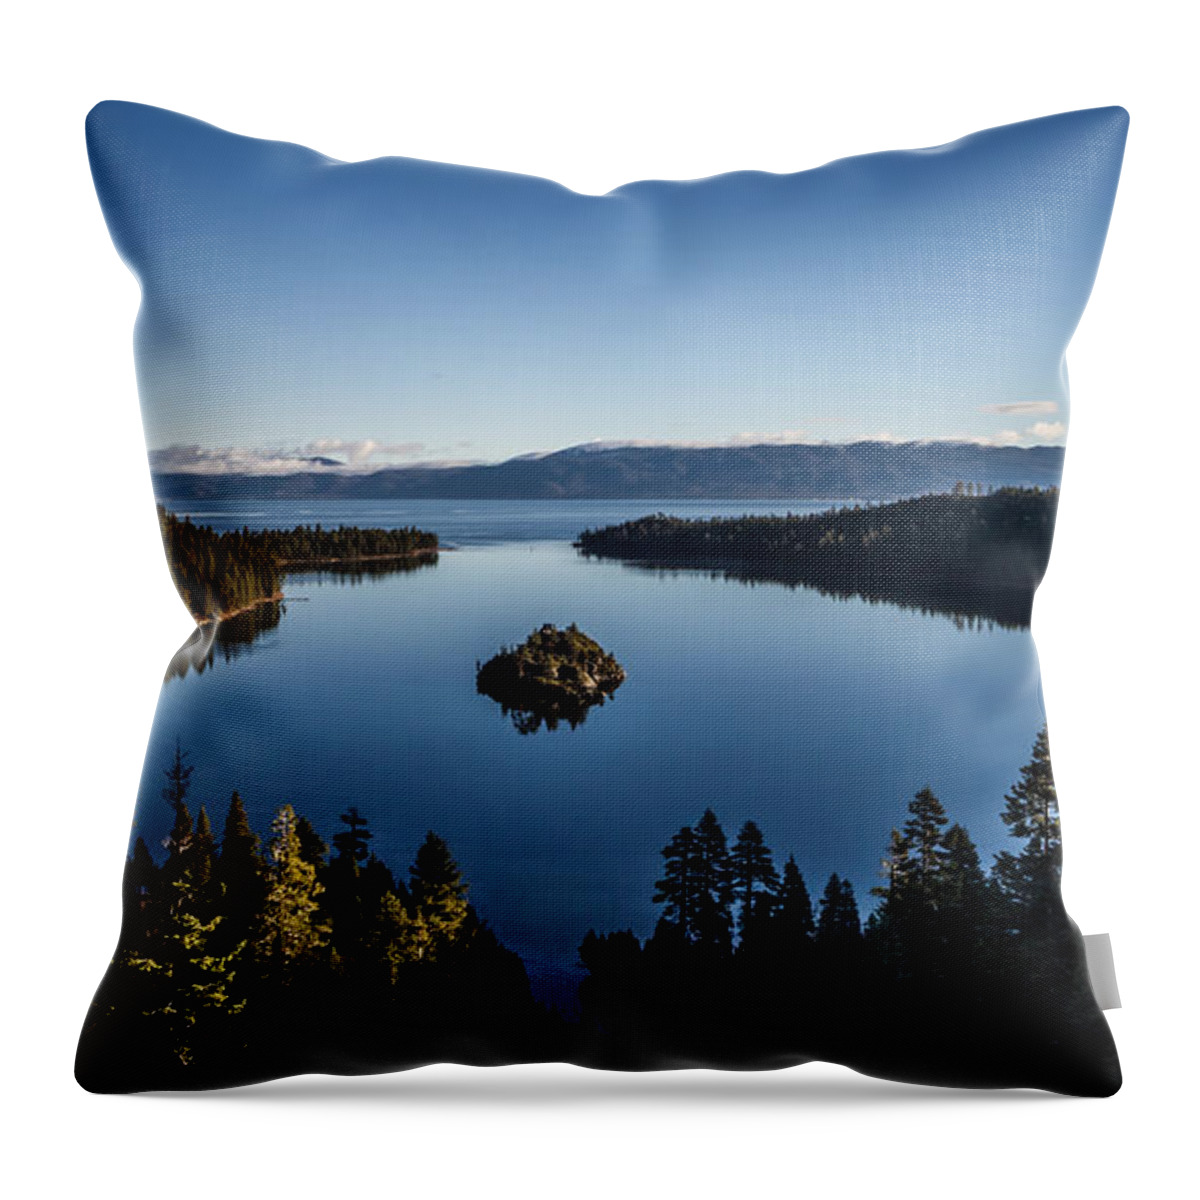 Generic Photo Of Emerald Bay Throw Pillow featuring the photograph A Generic Photo of Emerald Bay by Mitch Shindelbower